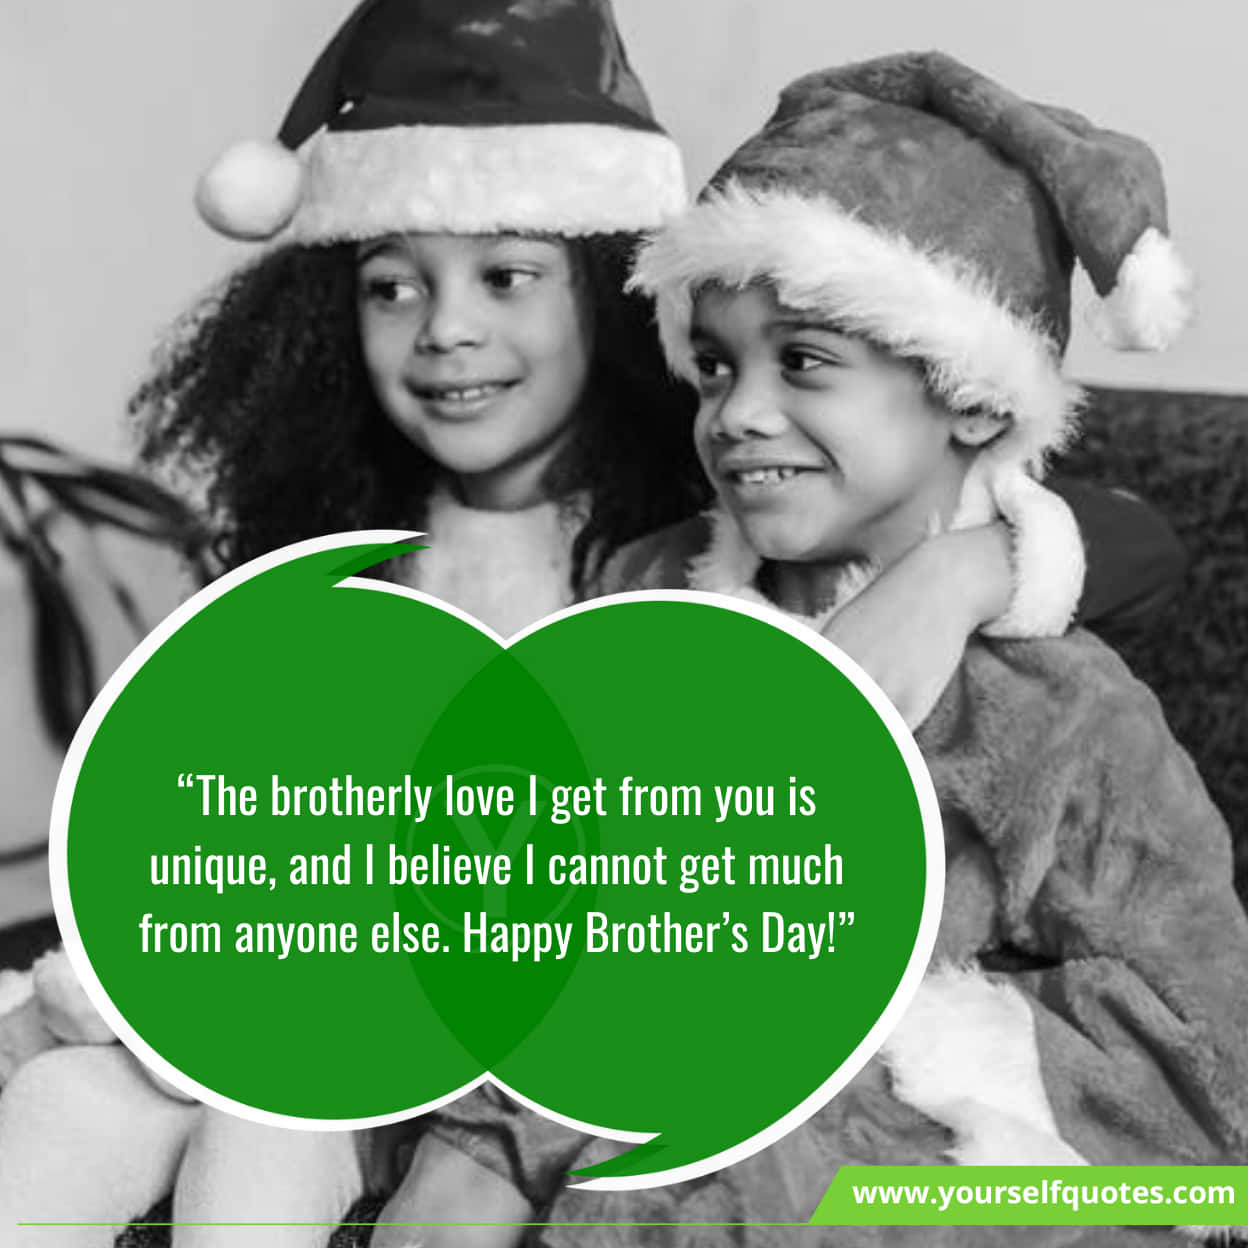 National Brother Day Sayings & Greetings